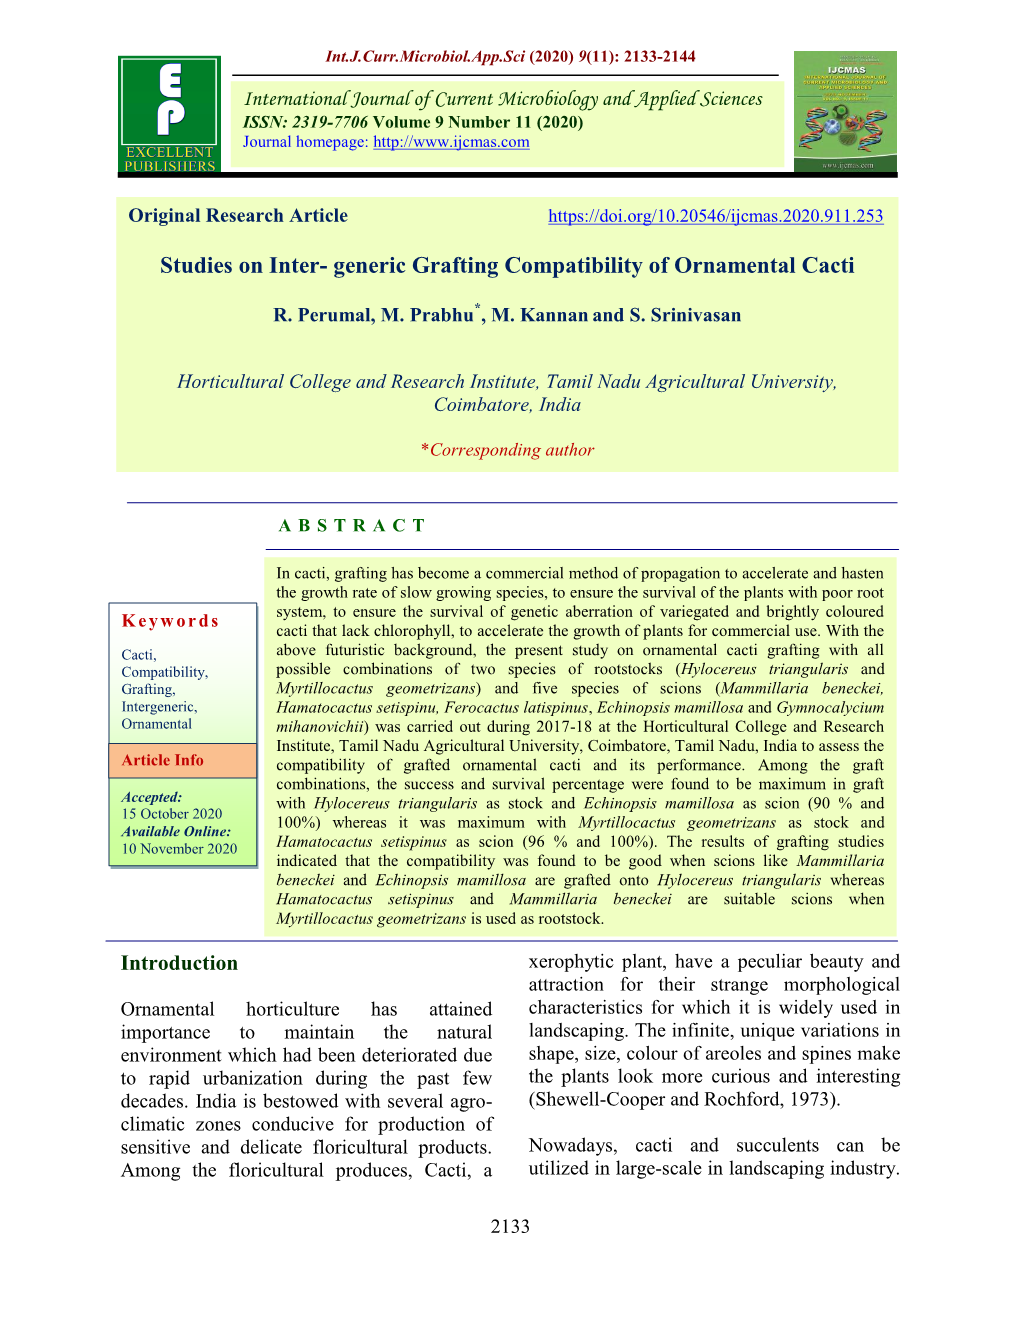 Studies on Inter- Generic Grafting Compatibility of Ornamental Cacti